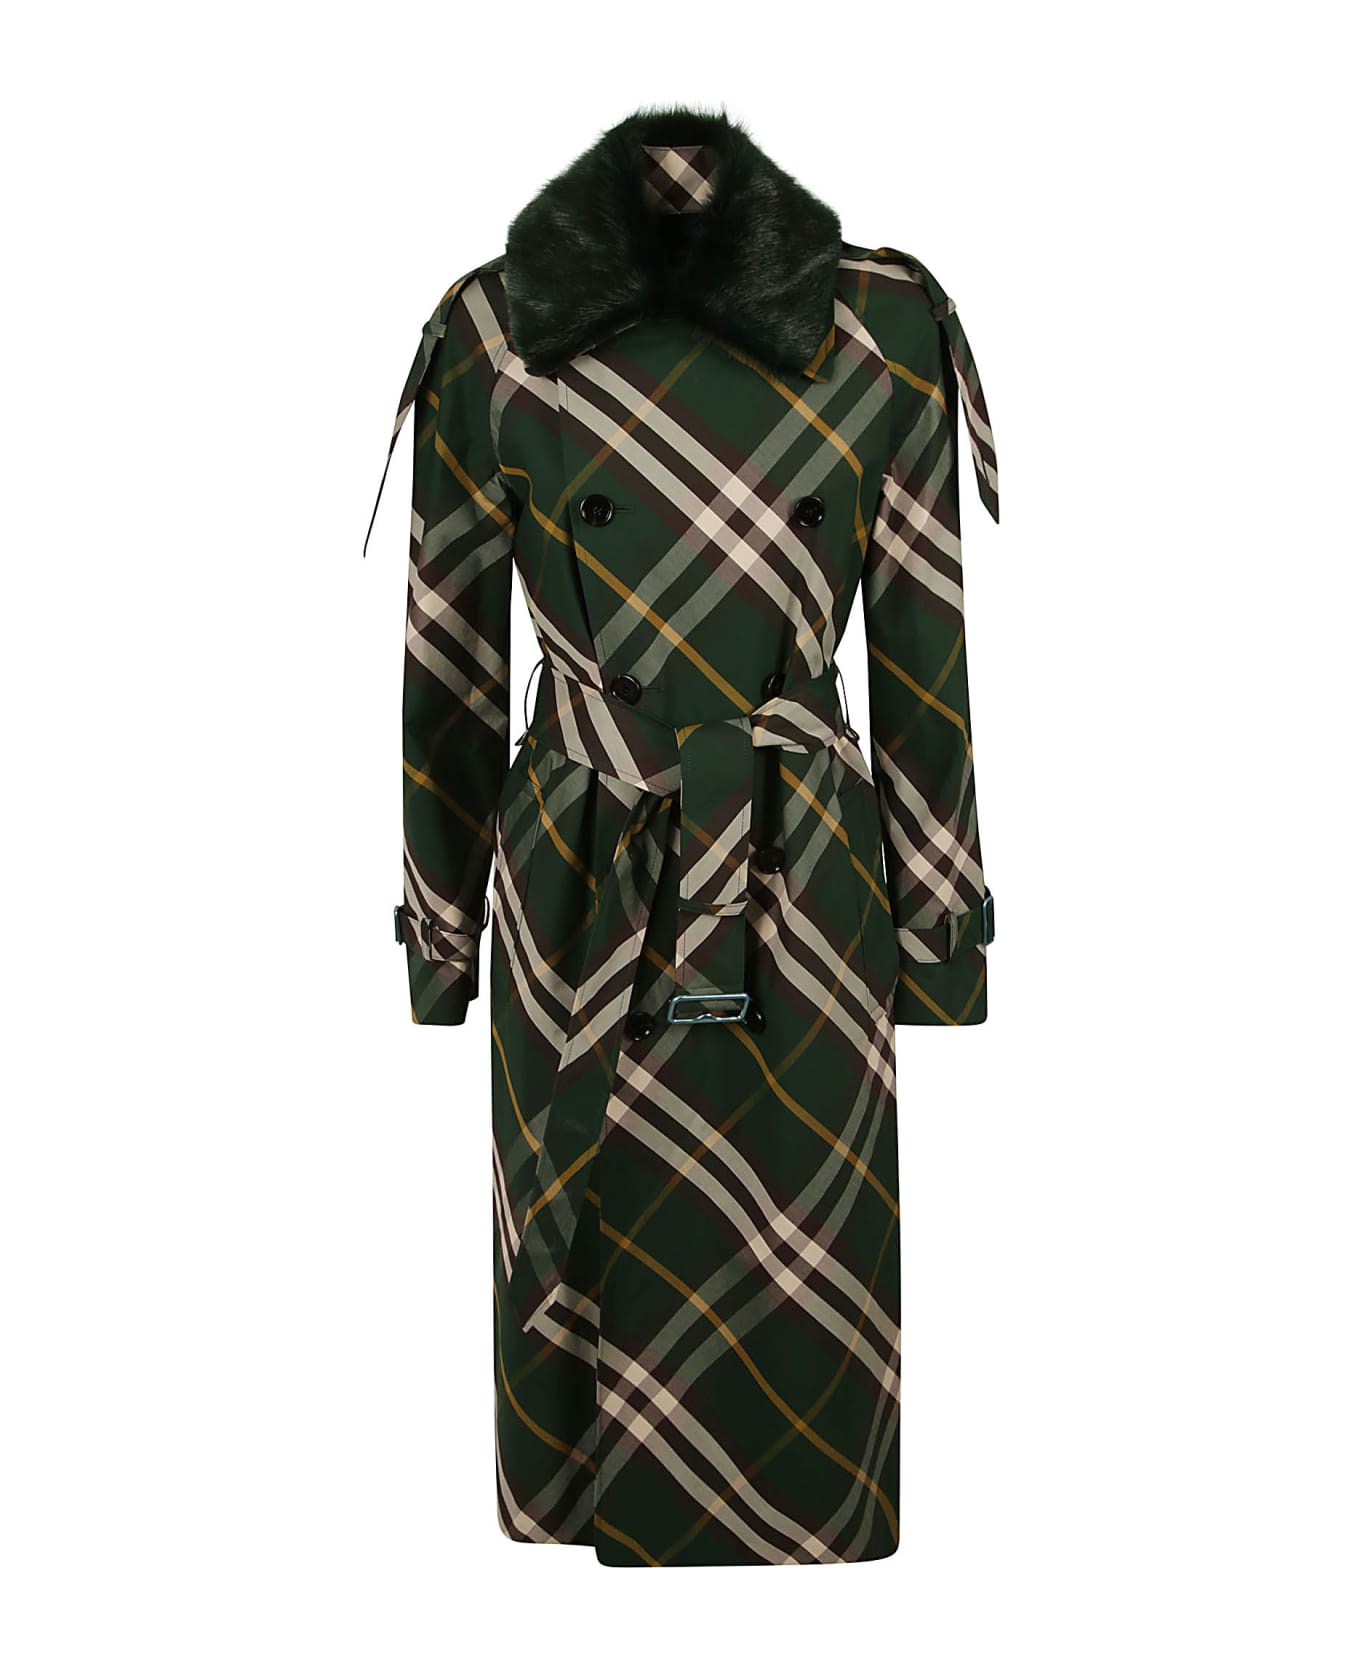 Burberry Check Belted Coat - IVY IP CHECK